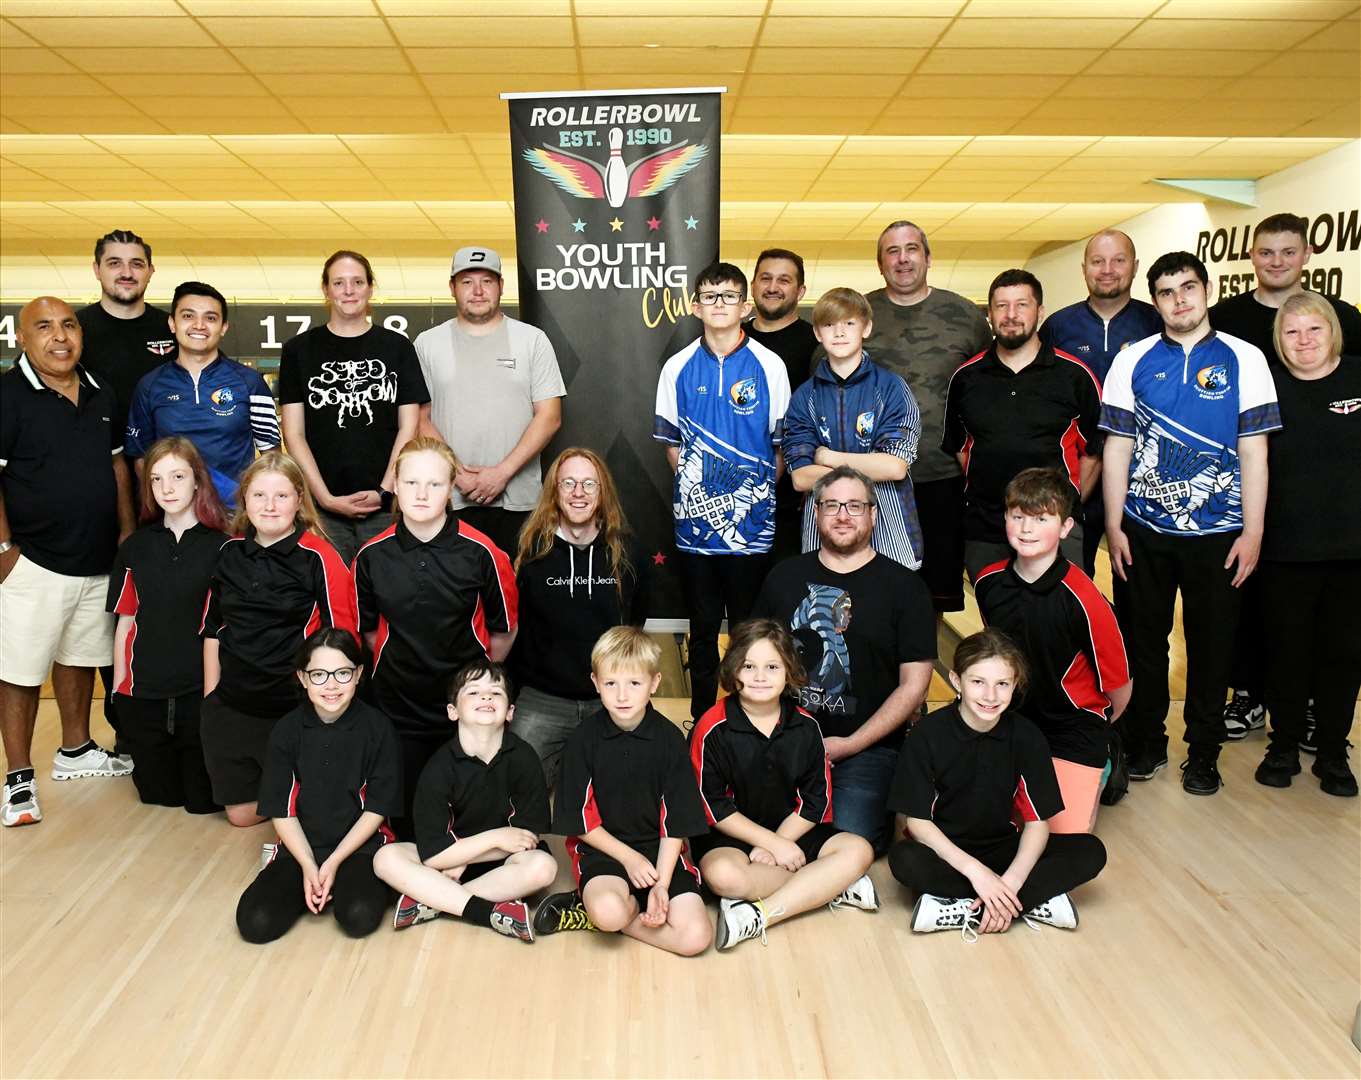 Rollerbowl hosts a thriving Youth Bowling Club which is giving the business its full support. Picture: James Mackenzie.